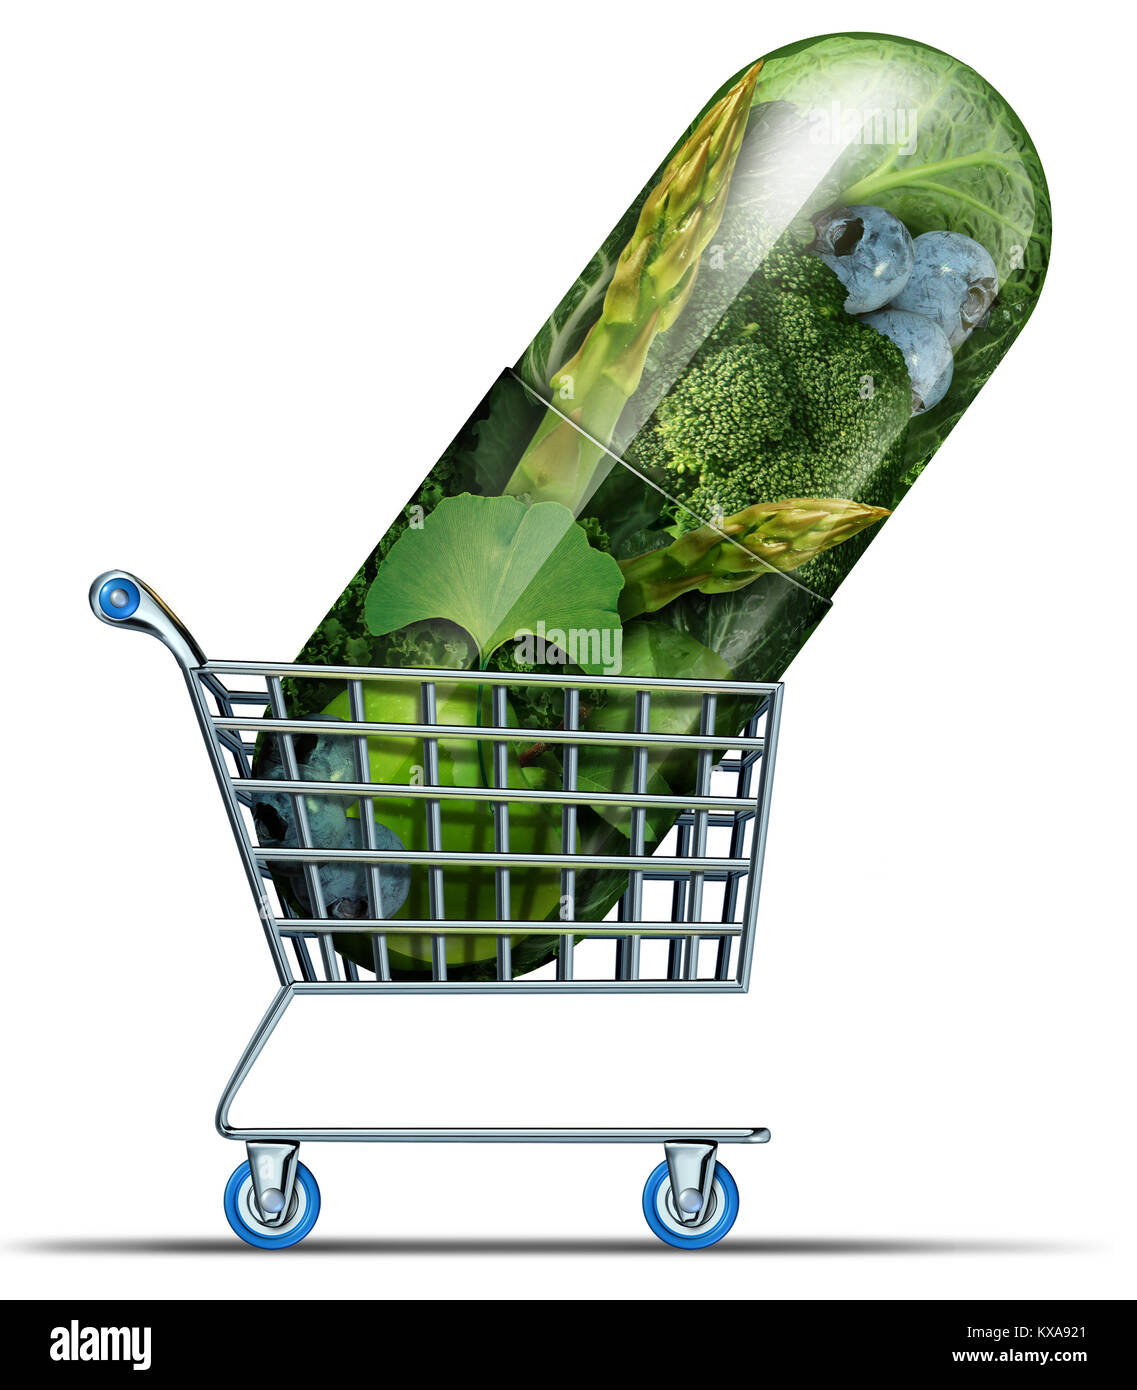 Supplement shopping and homeopathy alternative medicine concept as natural herbal remedy medication market in a capsule in a shop cart. Stock Photo